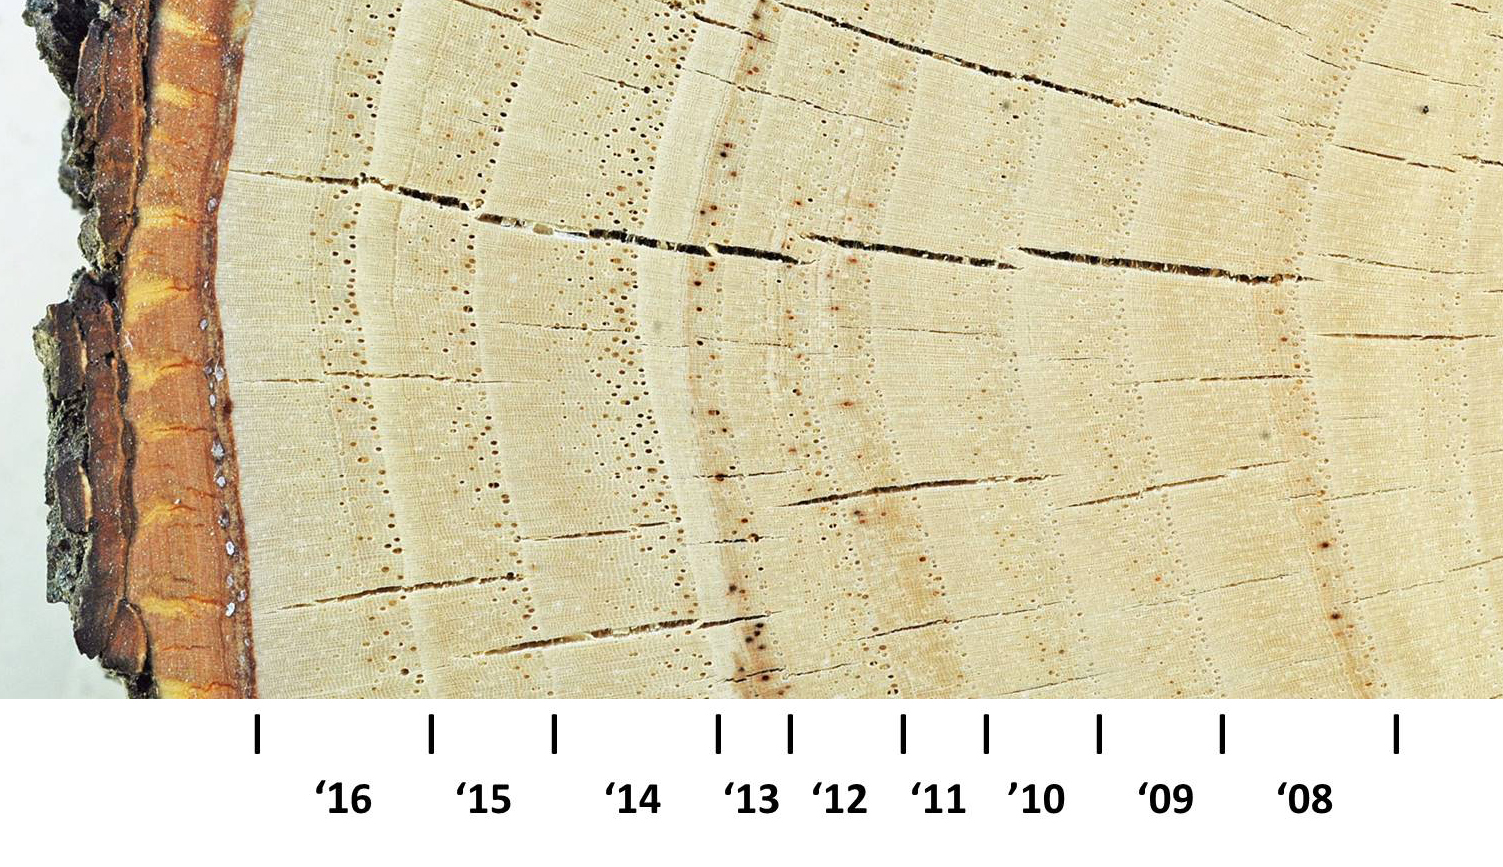 How to count tree rings for age - Quora